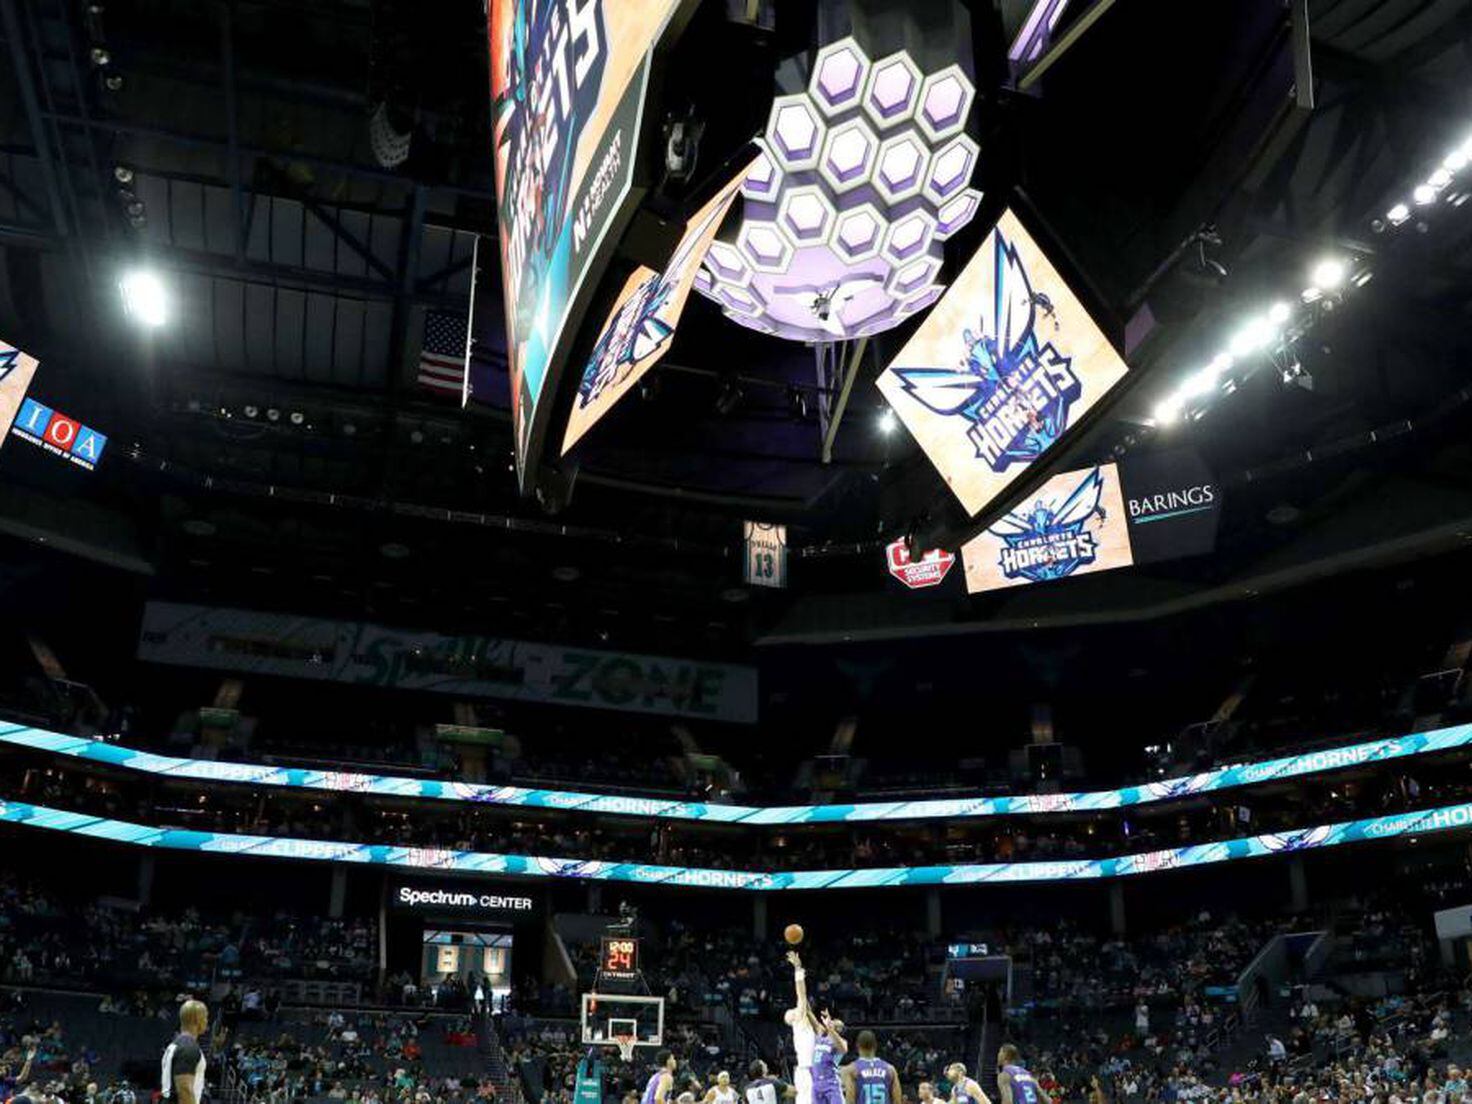 Charlotte Hornets home to get a new name: Spectrum Center